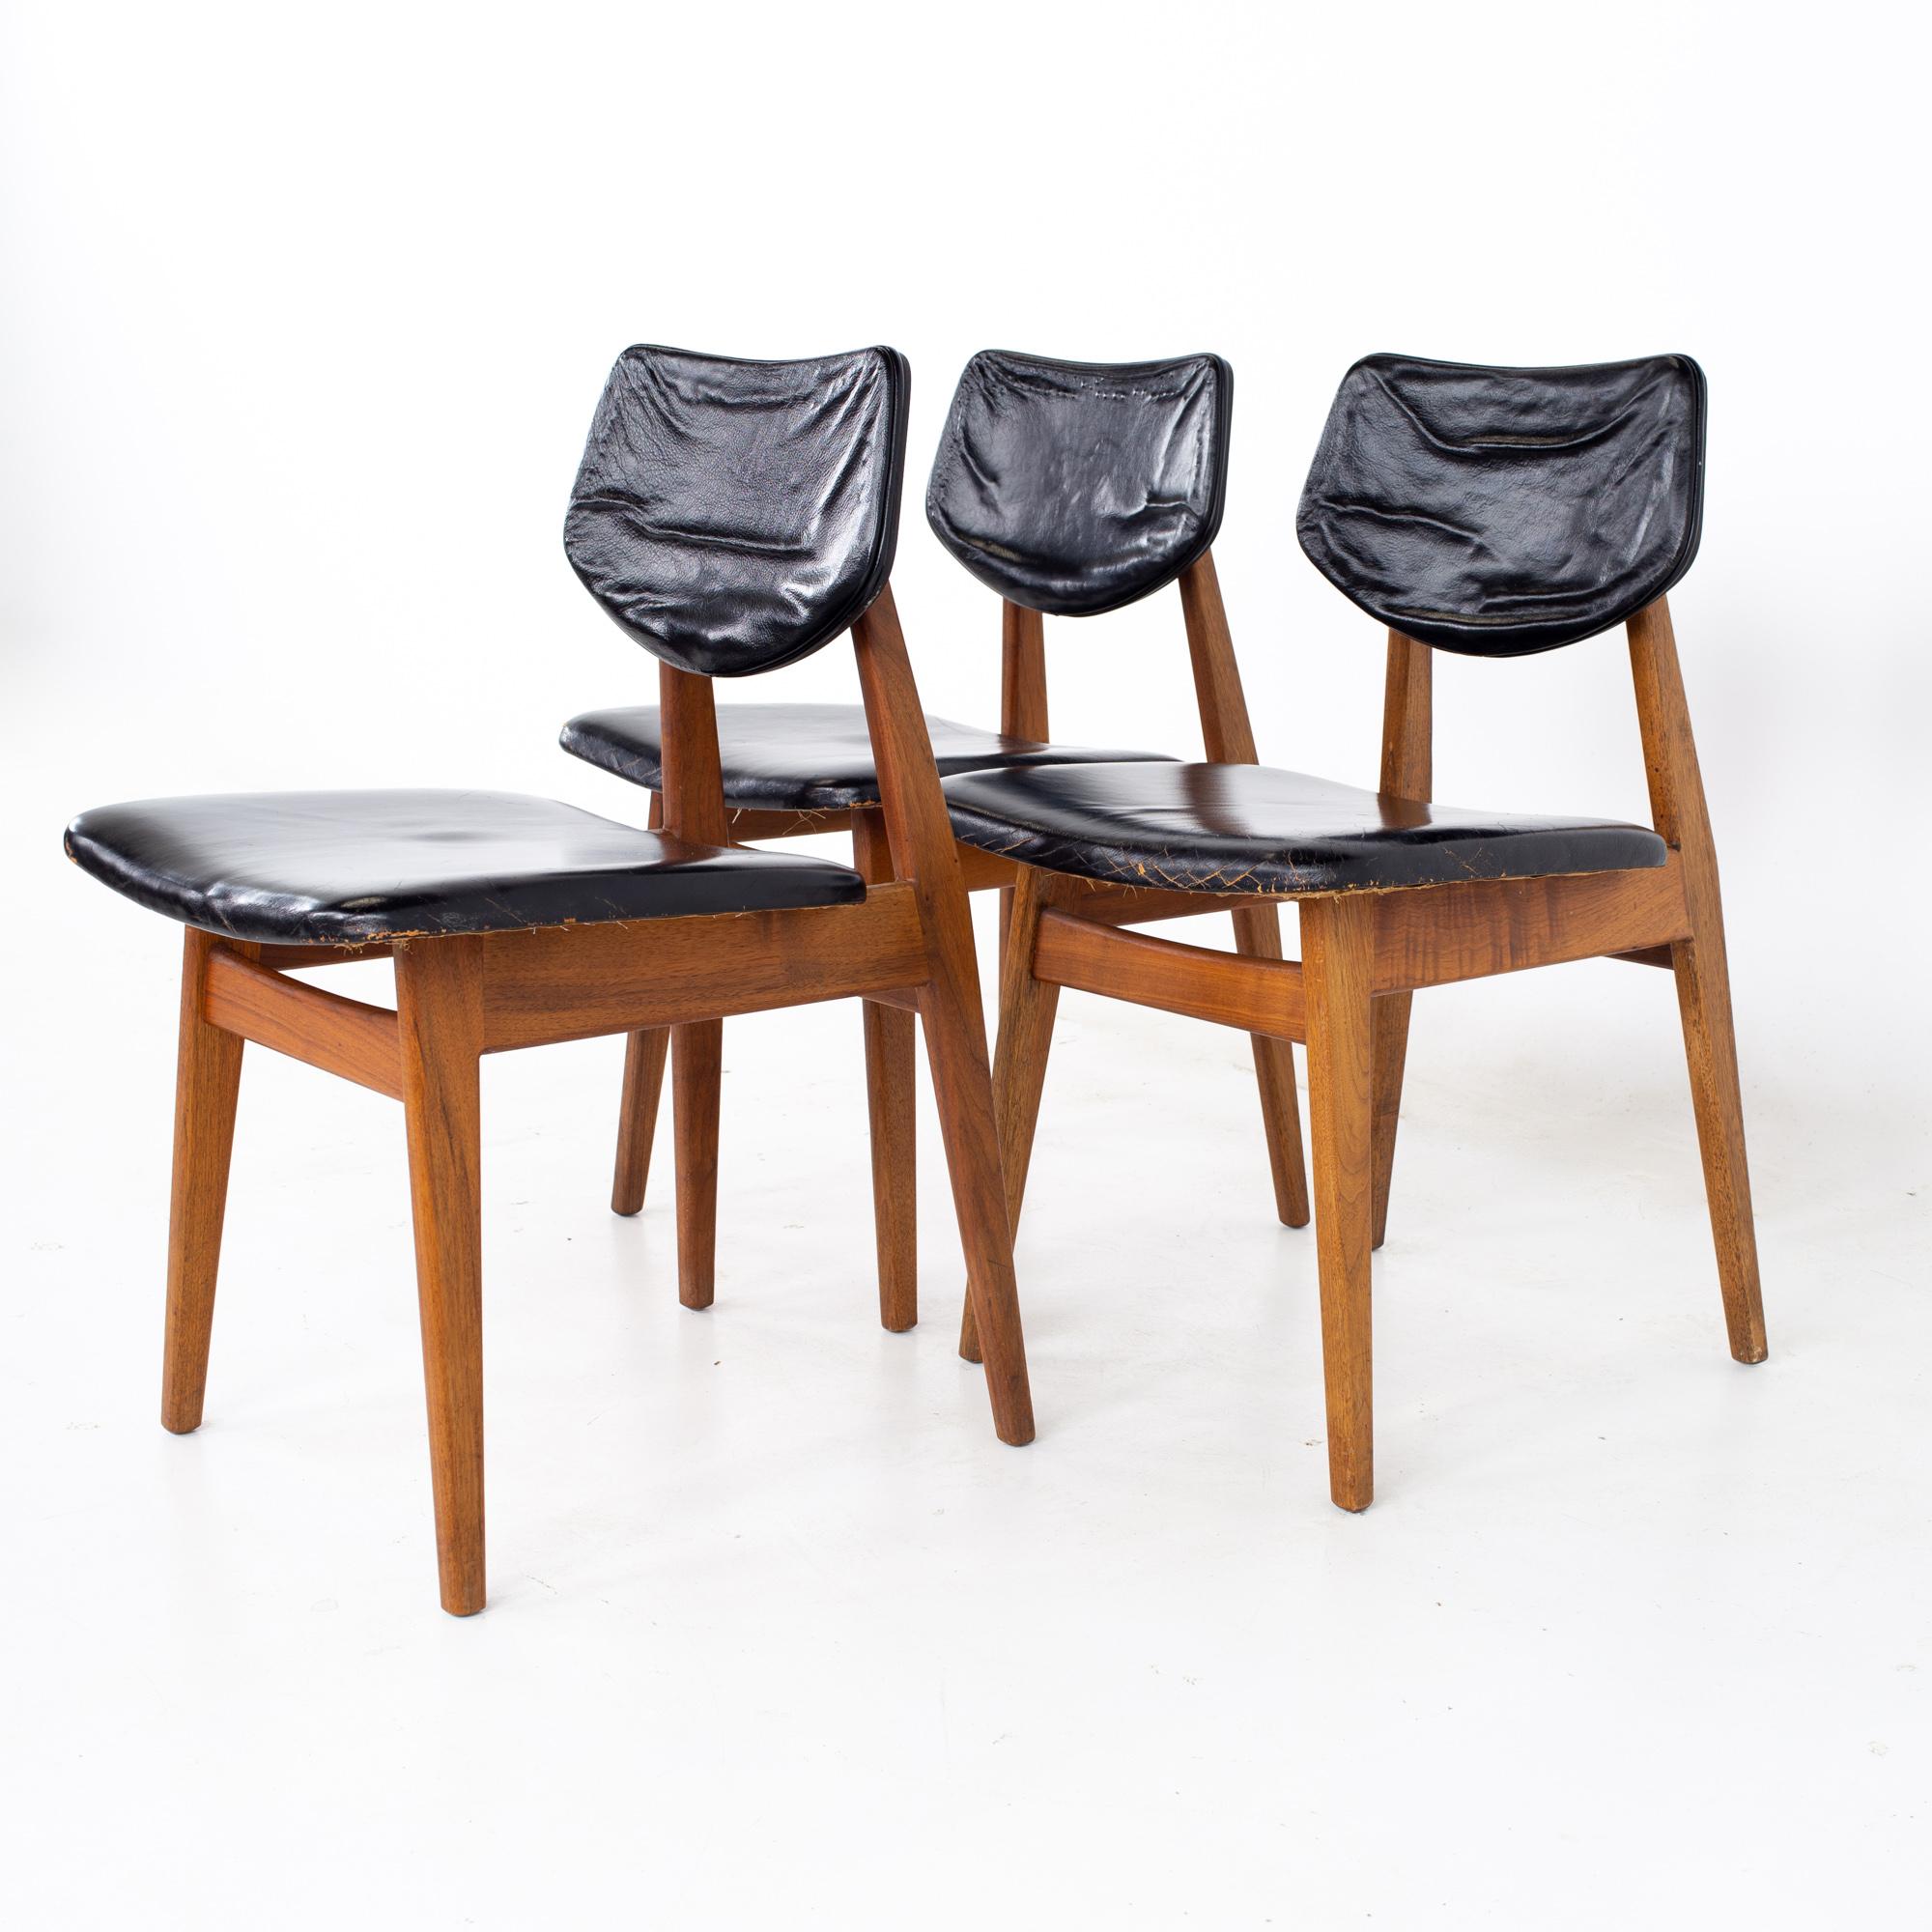 Jens Risom mid century walnut dining chairs - Set of 3
Each chair measures: 18 wide x 20.5 deep x 32 high, with a seat height of 18.5 inches

All pieces of furniture can be had in what we call restored vintage condition. That means the piece is